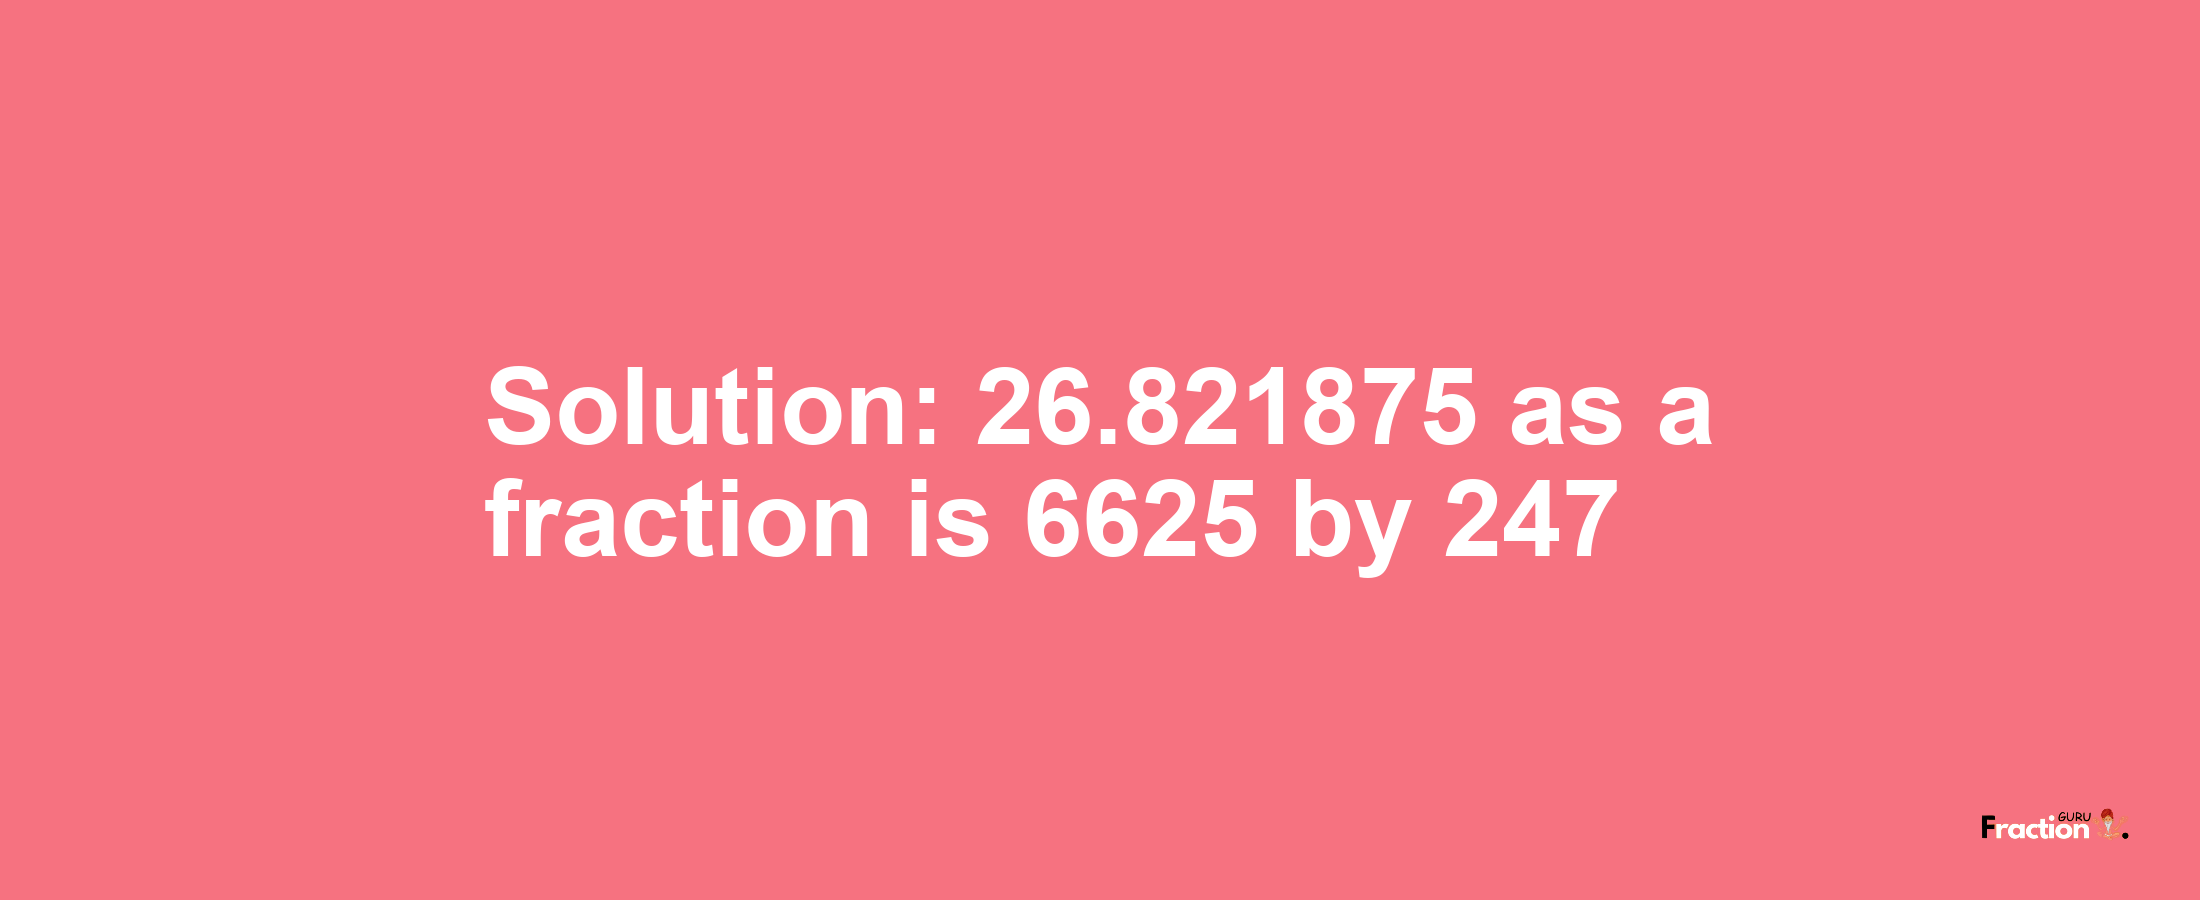 Solution:26.821875 as a fraction is 6625/247